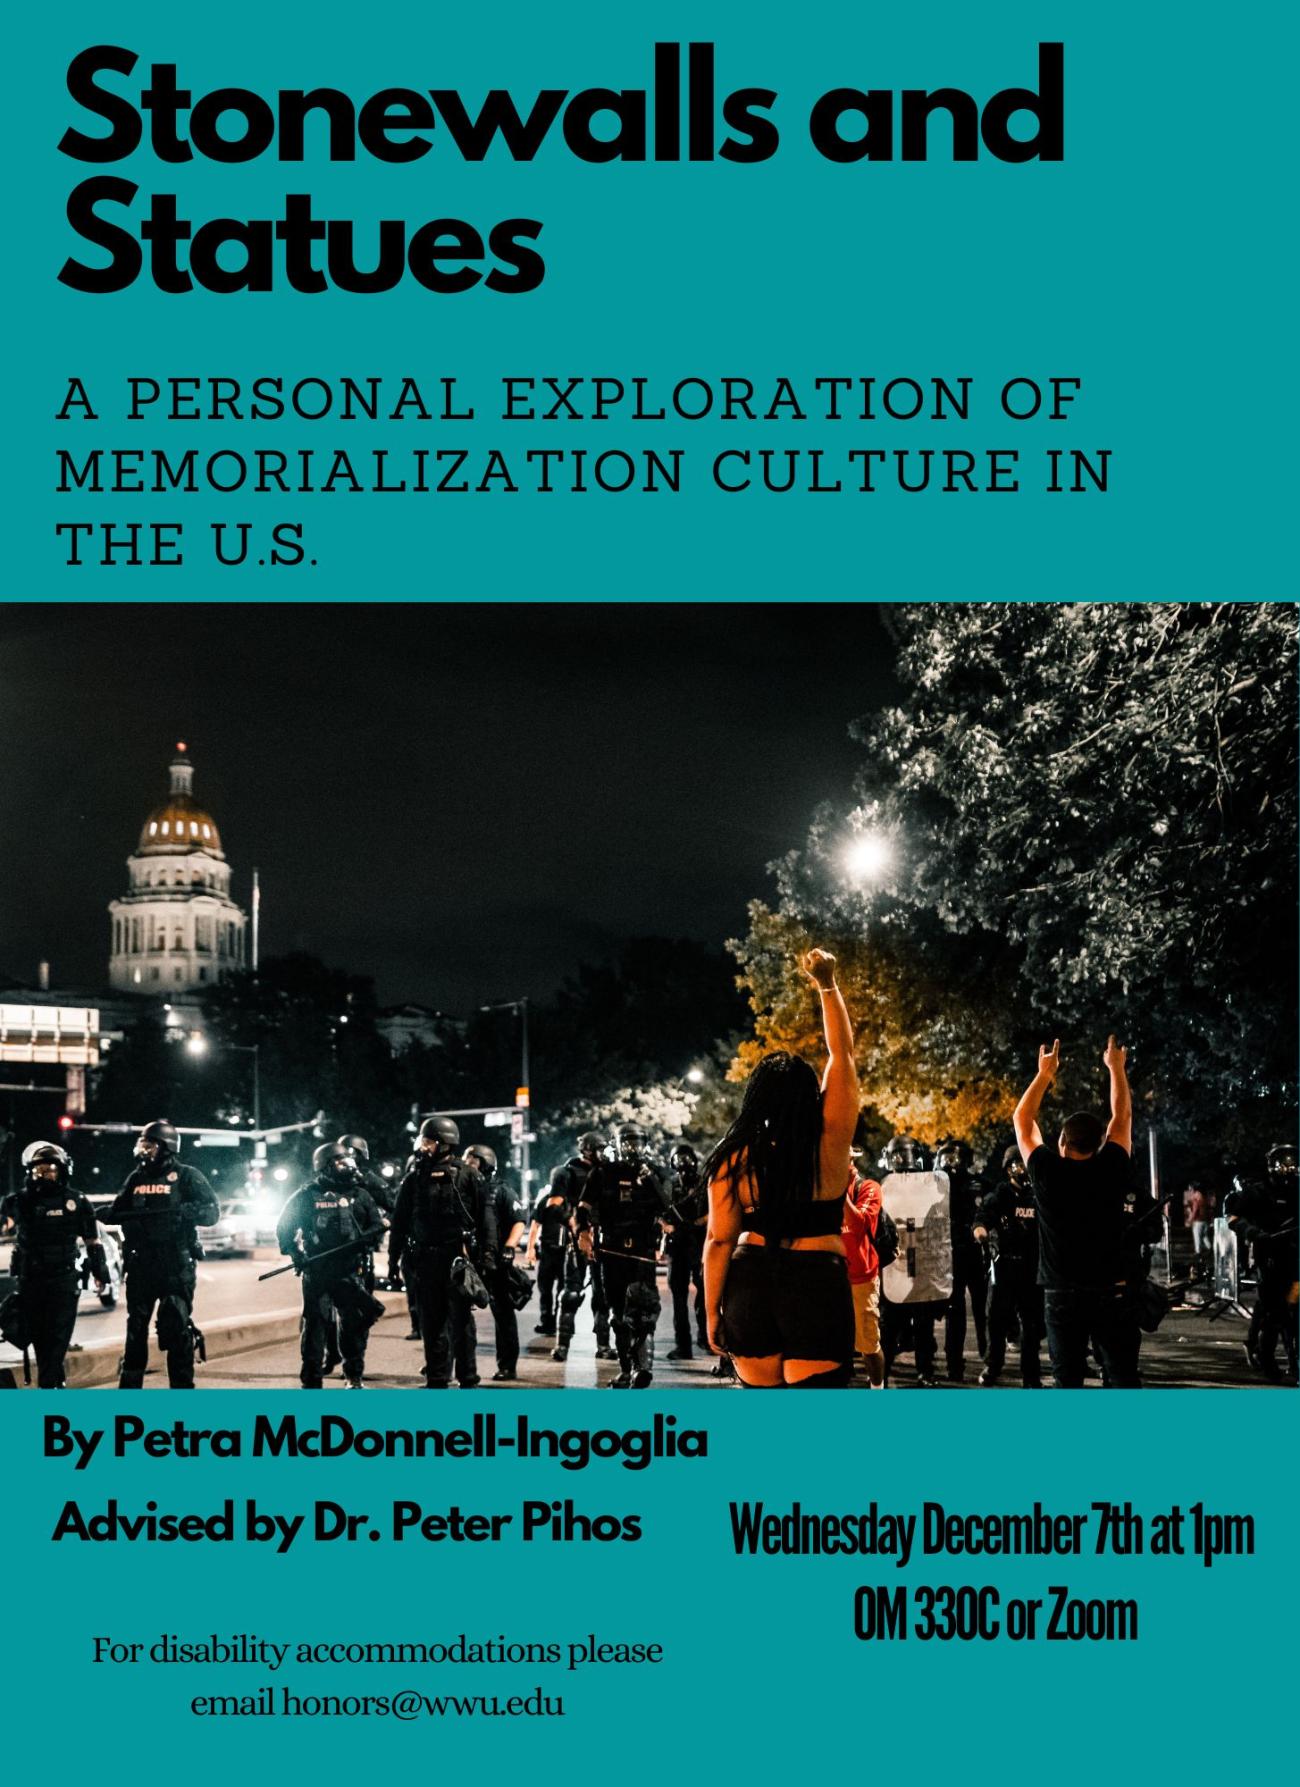 A poster with a teal background and an image of people at a protest. The text reads: "Stonewalls and Statues: A Personal Exploration of Memorialization Culture in the U.S. Picture of policemen standing in front of a young girl with her arm raised in front of the US capital building. By Petra McDonnell-Ingoglia, Advised by Dr. Peter Pihos. Wednesday December 7th at 1pm in Old Main 330C or on Zoom. For disability accommodations please email honors@wwu.edu."